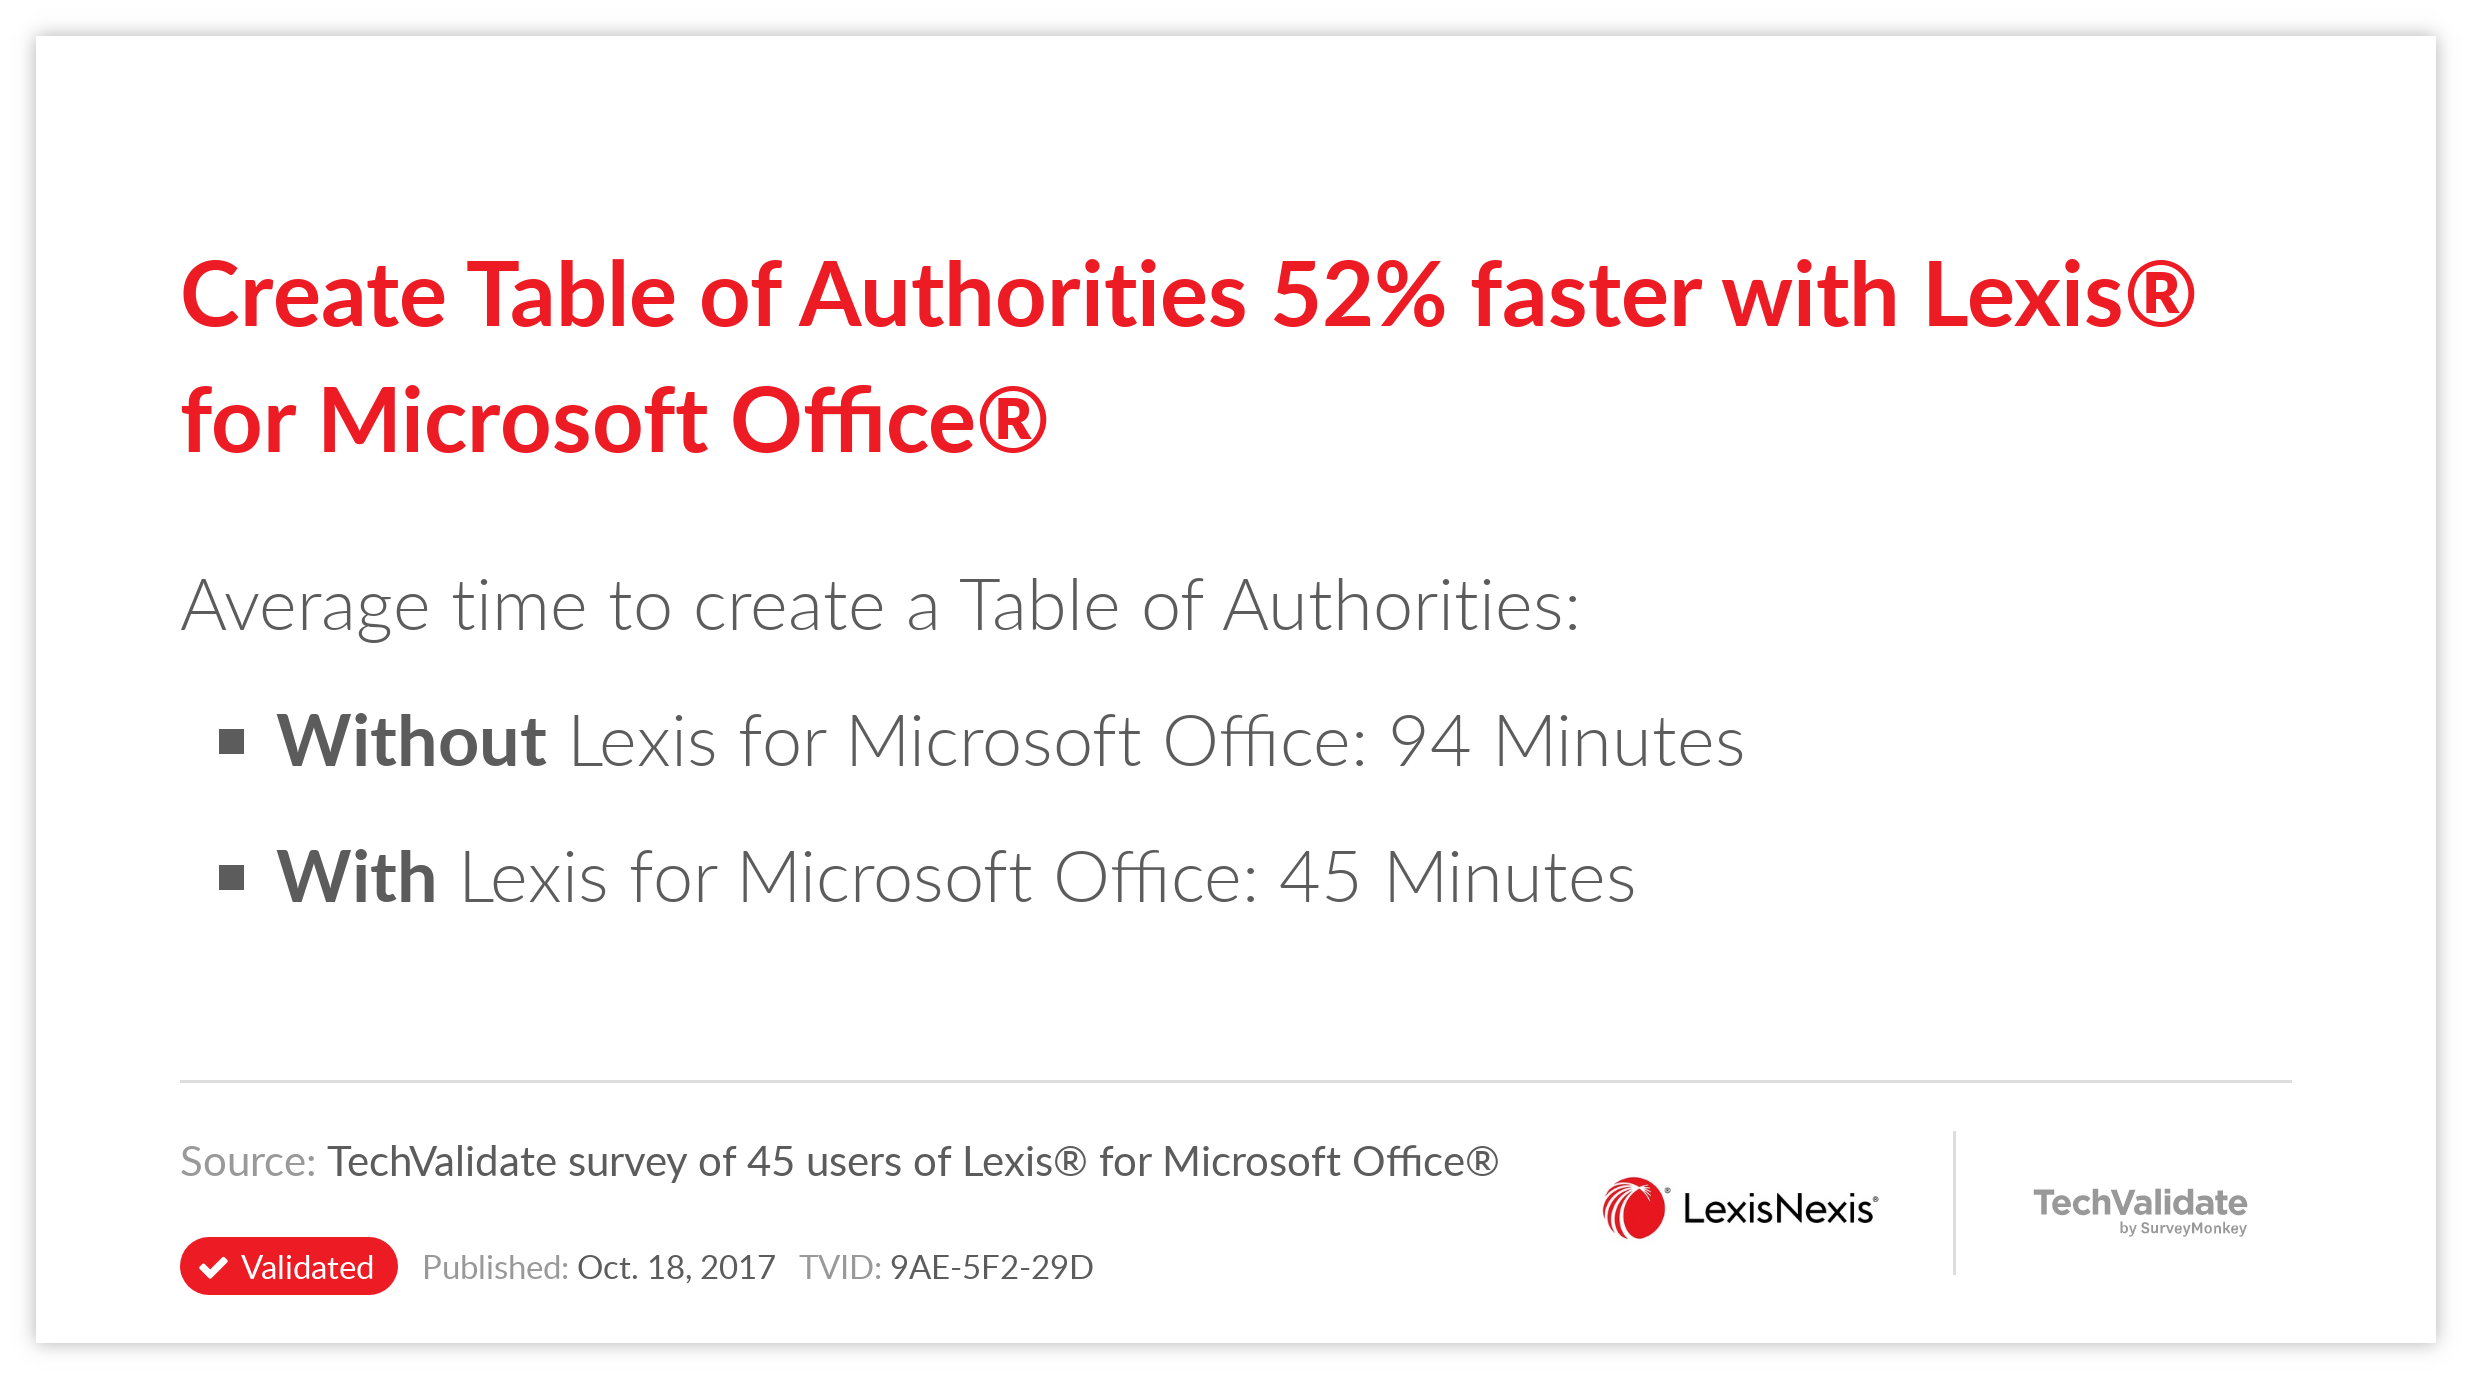 Create Table of Authorities 52% faster with Lexis® for Microsoft Office®